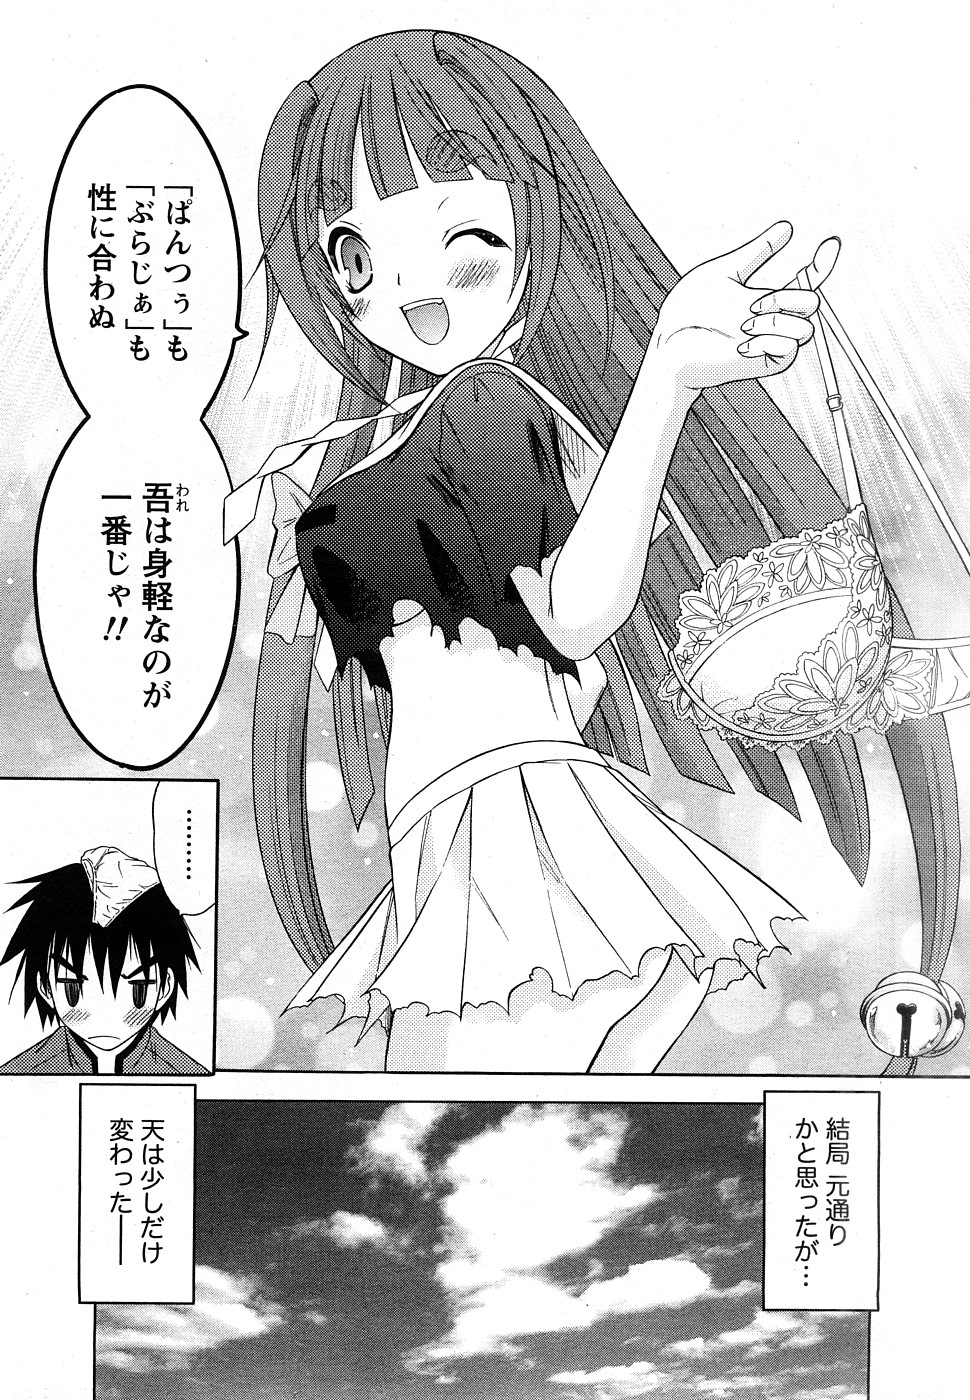 Comic Marble Vol.9 [2009-2] page 36 full